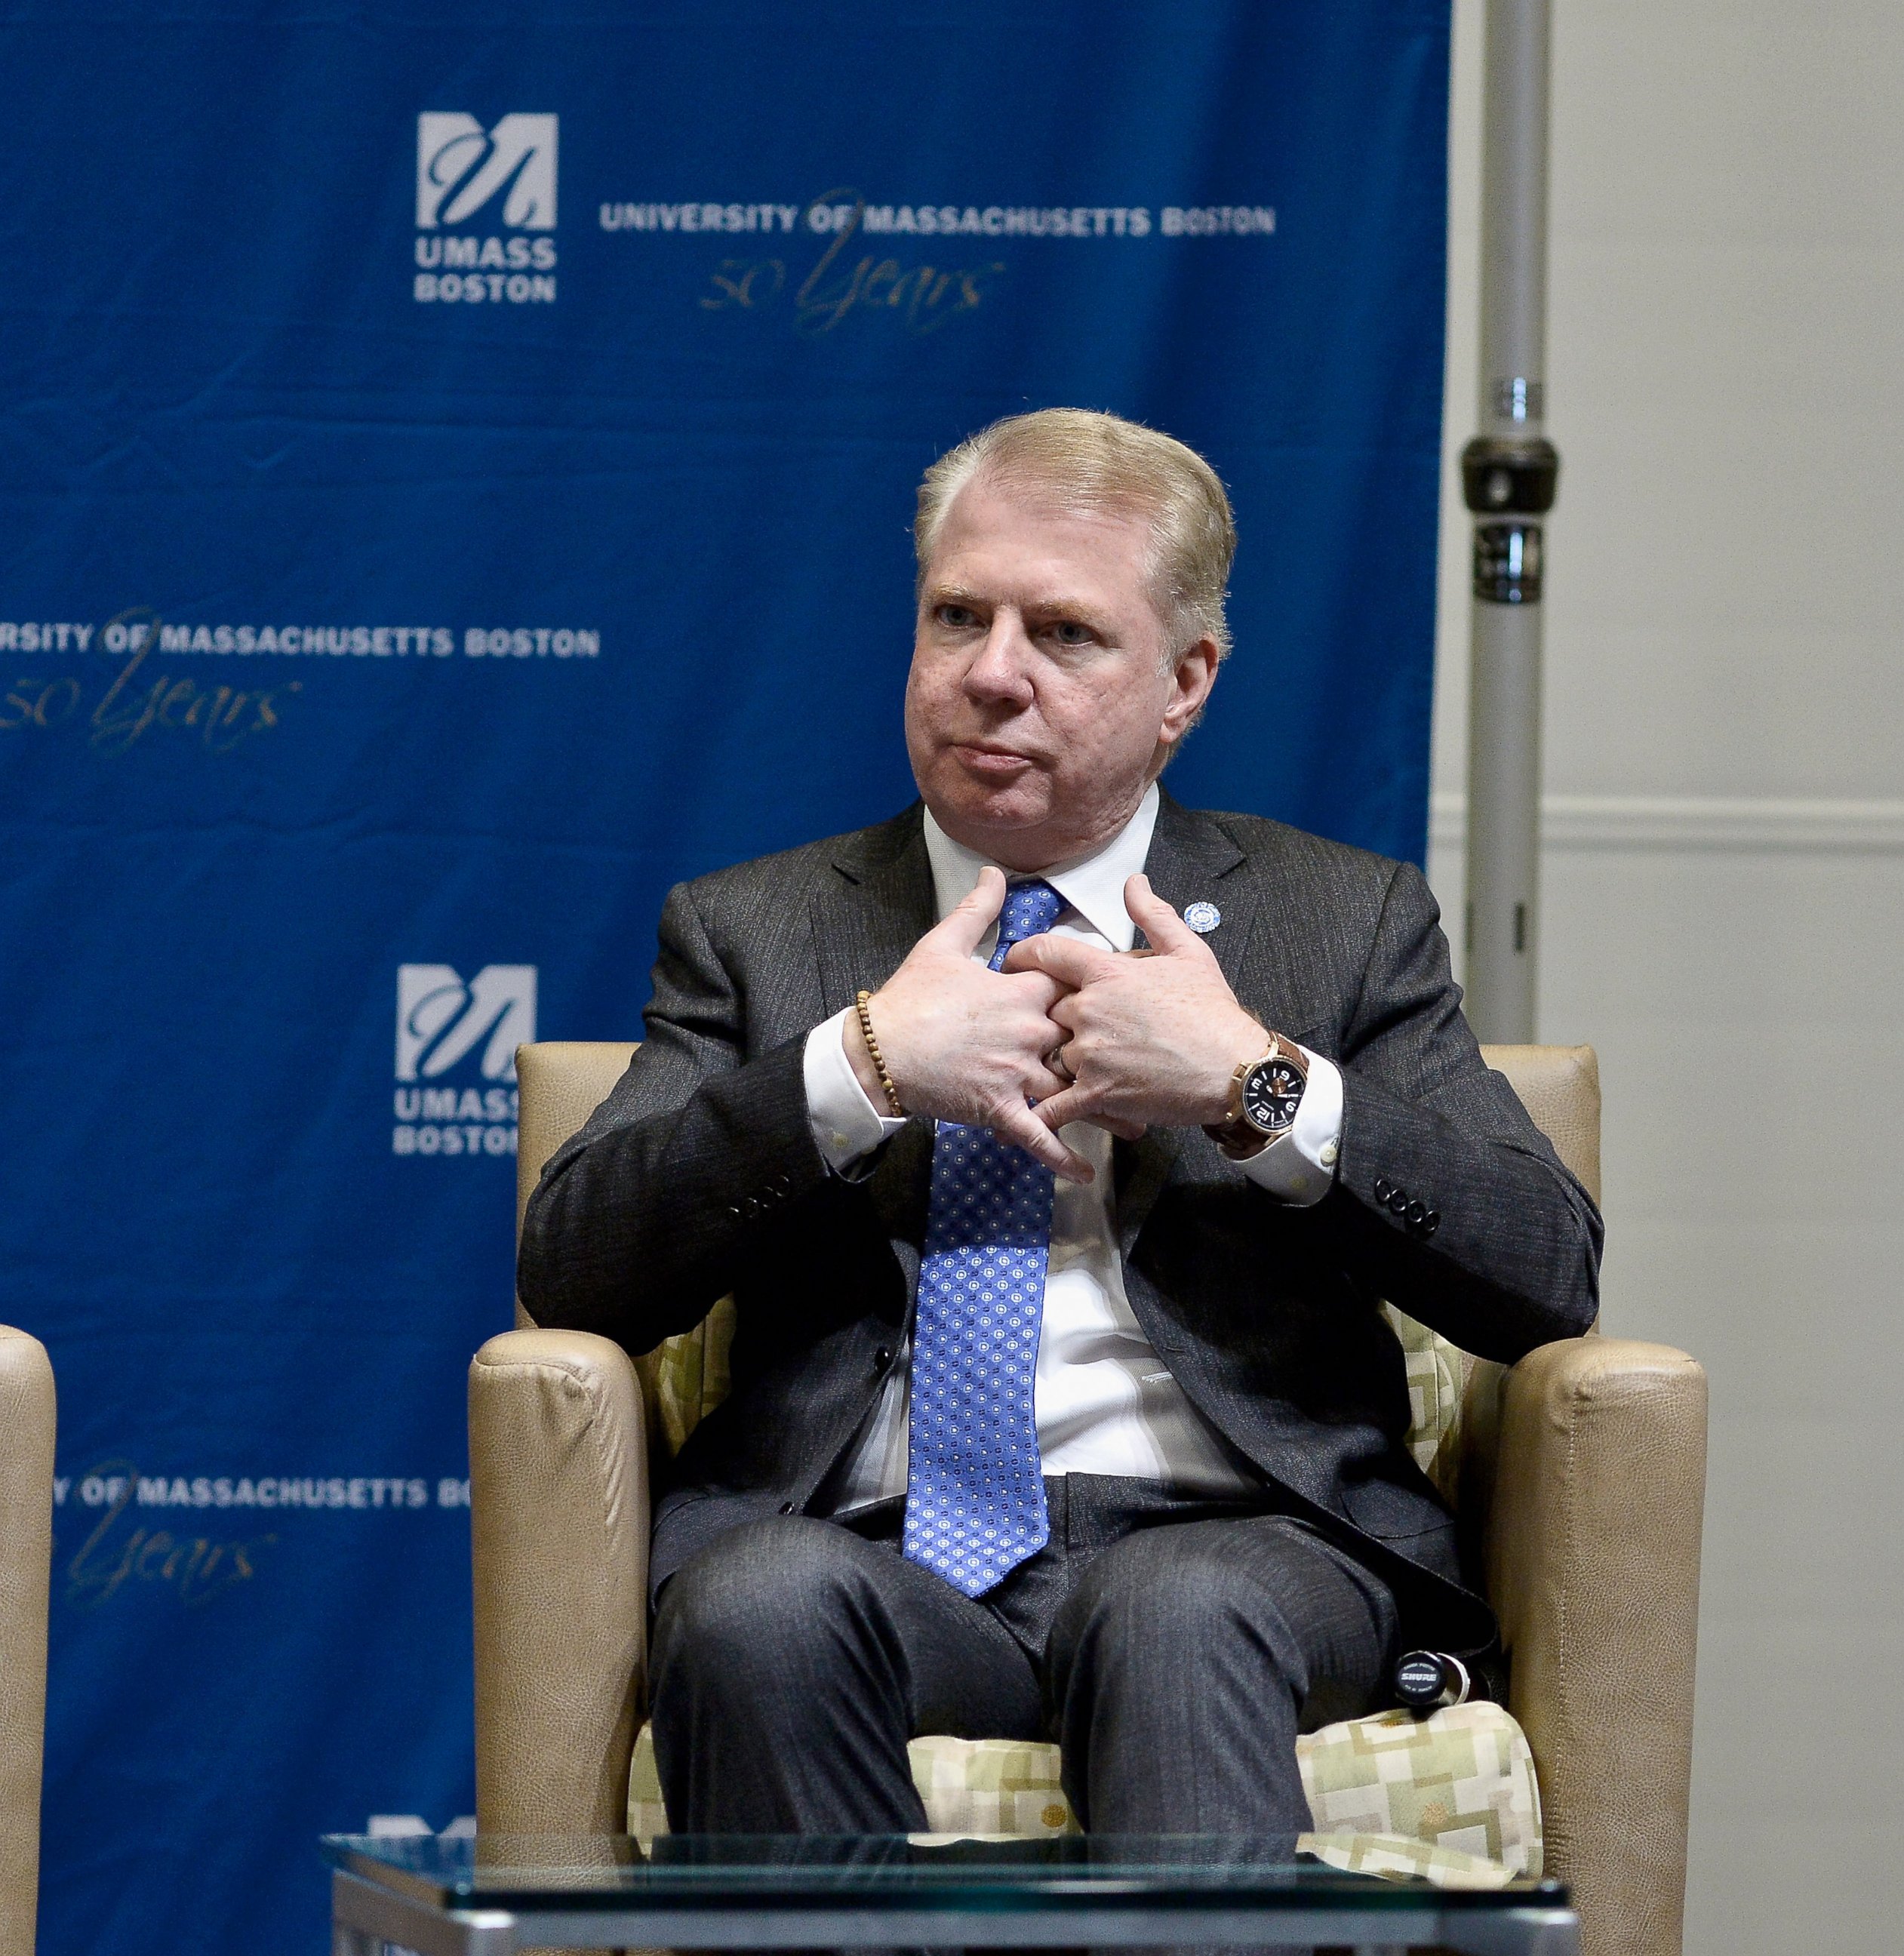 PHOTO: Seattle Mayor Ed Murray speaks at Municipal Strategies for Financial Empowerment, a public forum hosted by Boston Mayor Martin J. Walsh at UMass Campus Center on March 22, 2015 in Boston.